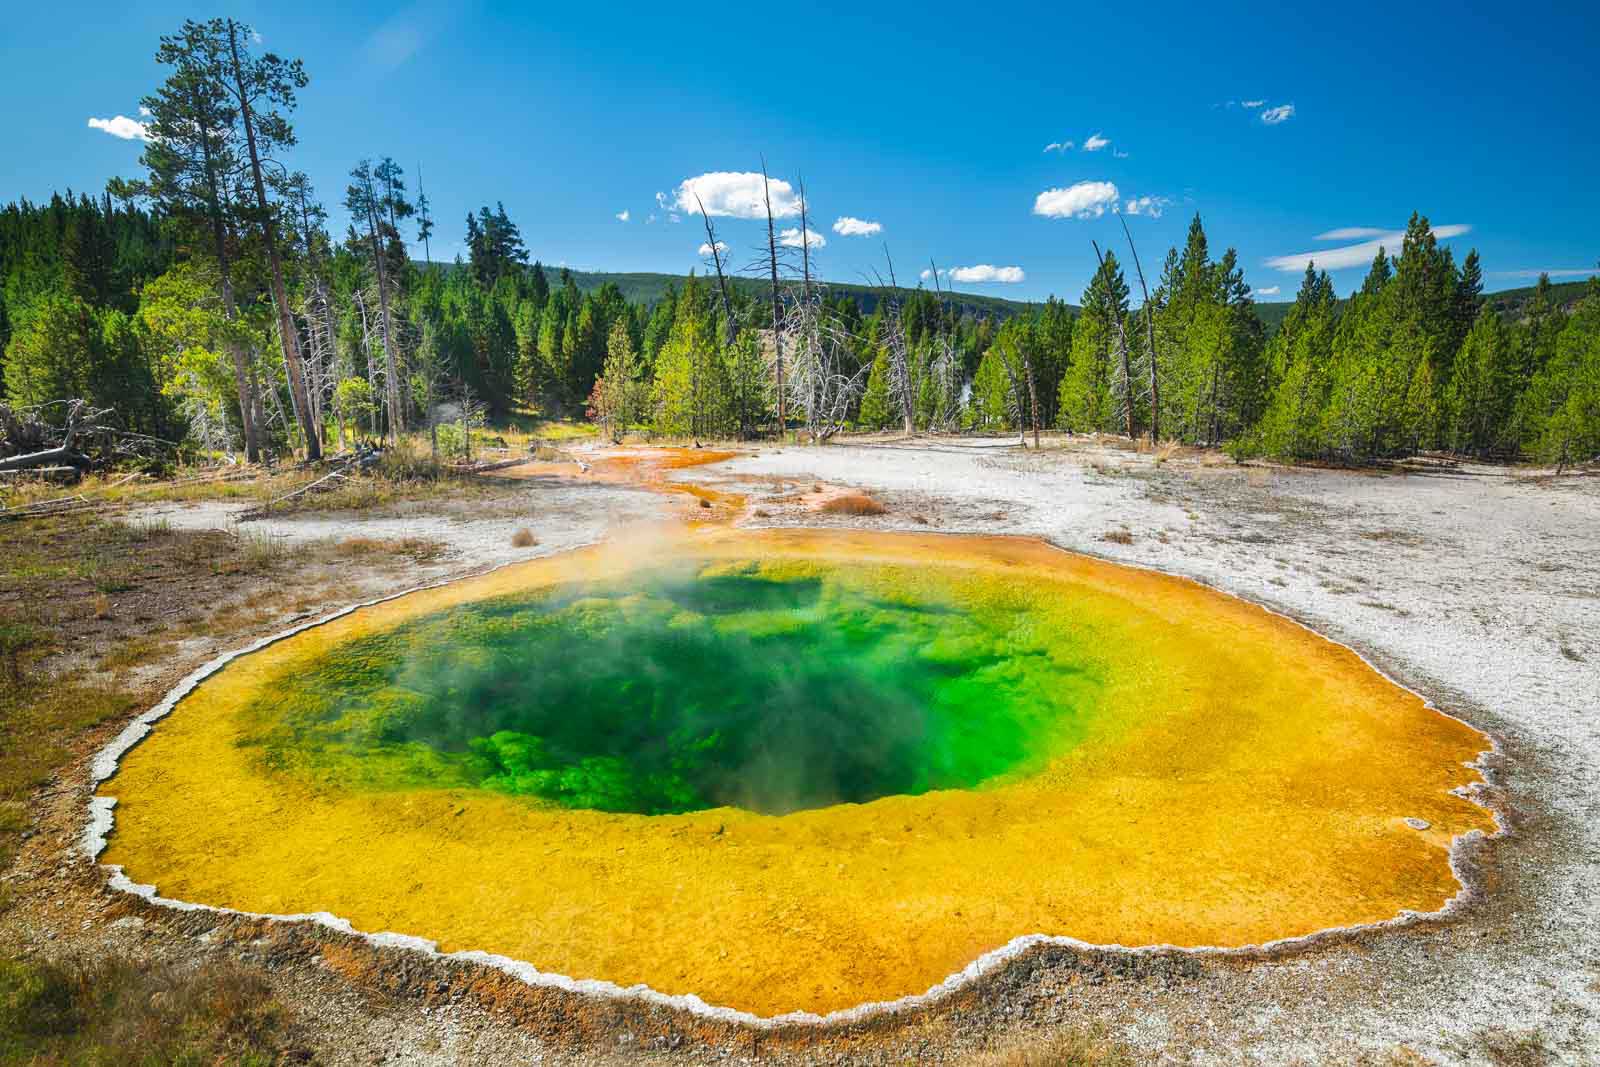 Where to Stay in Yellowstone National Park - Guide to the Best Hotels